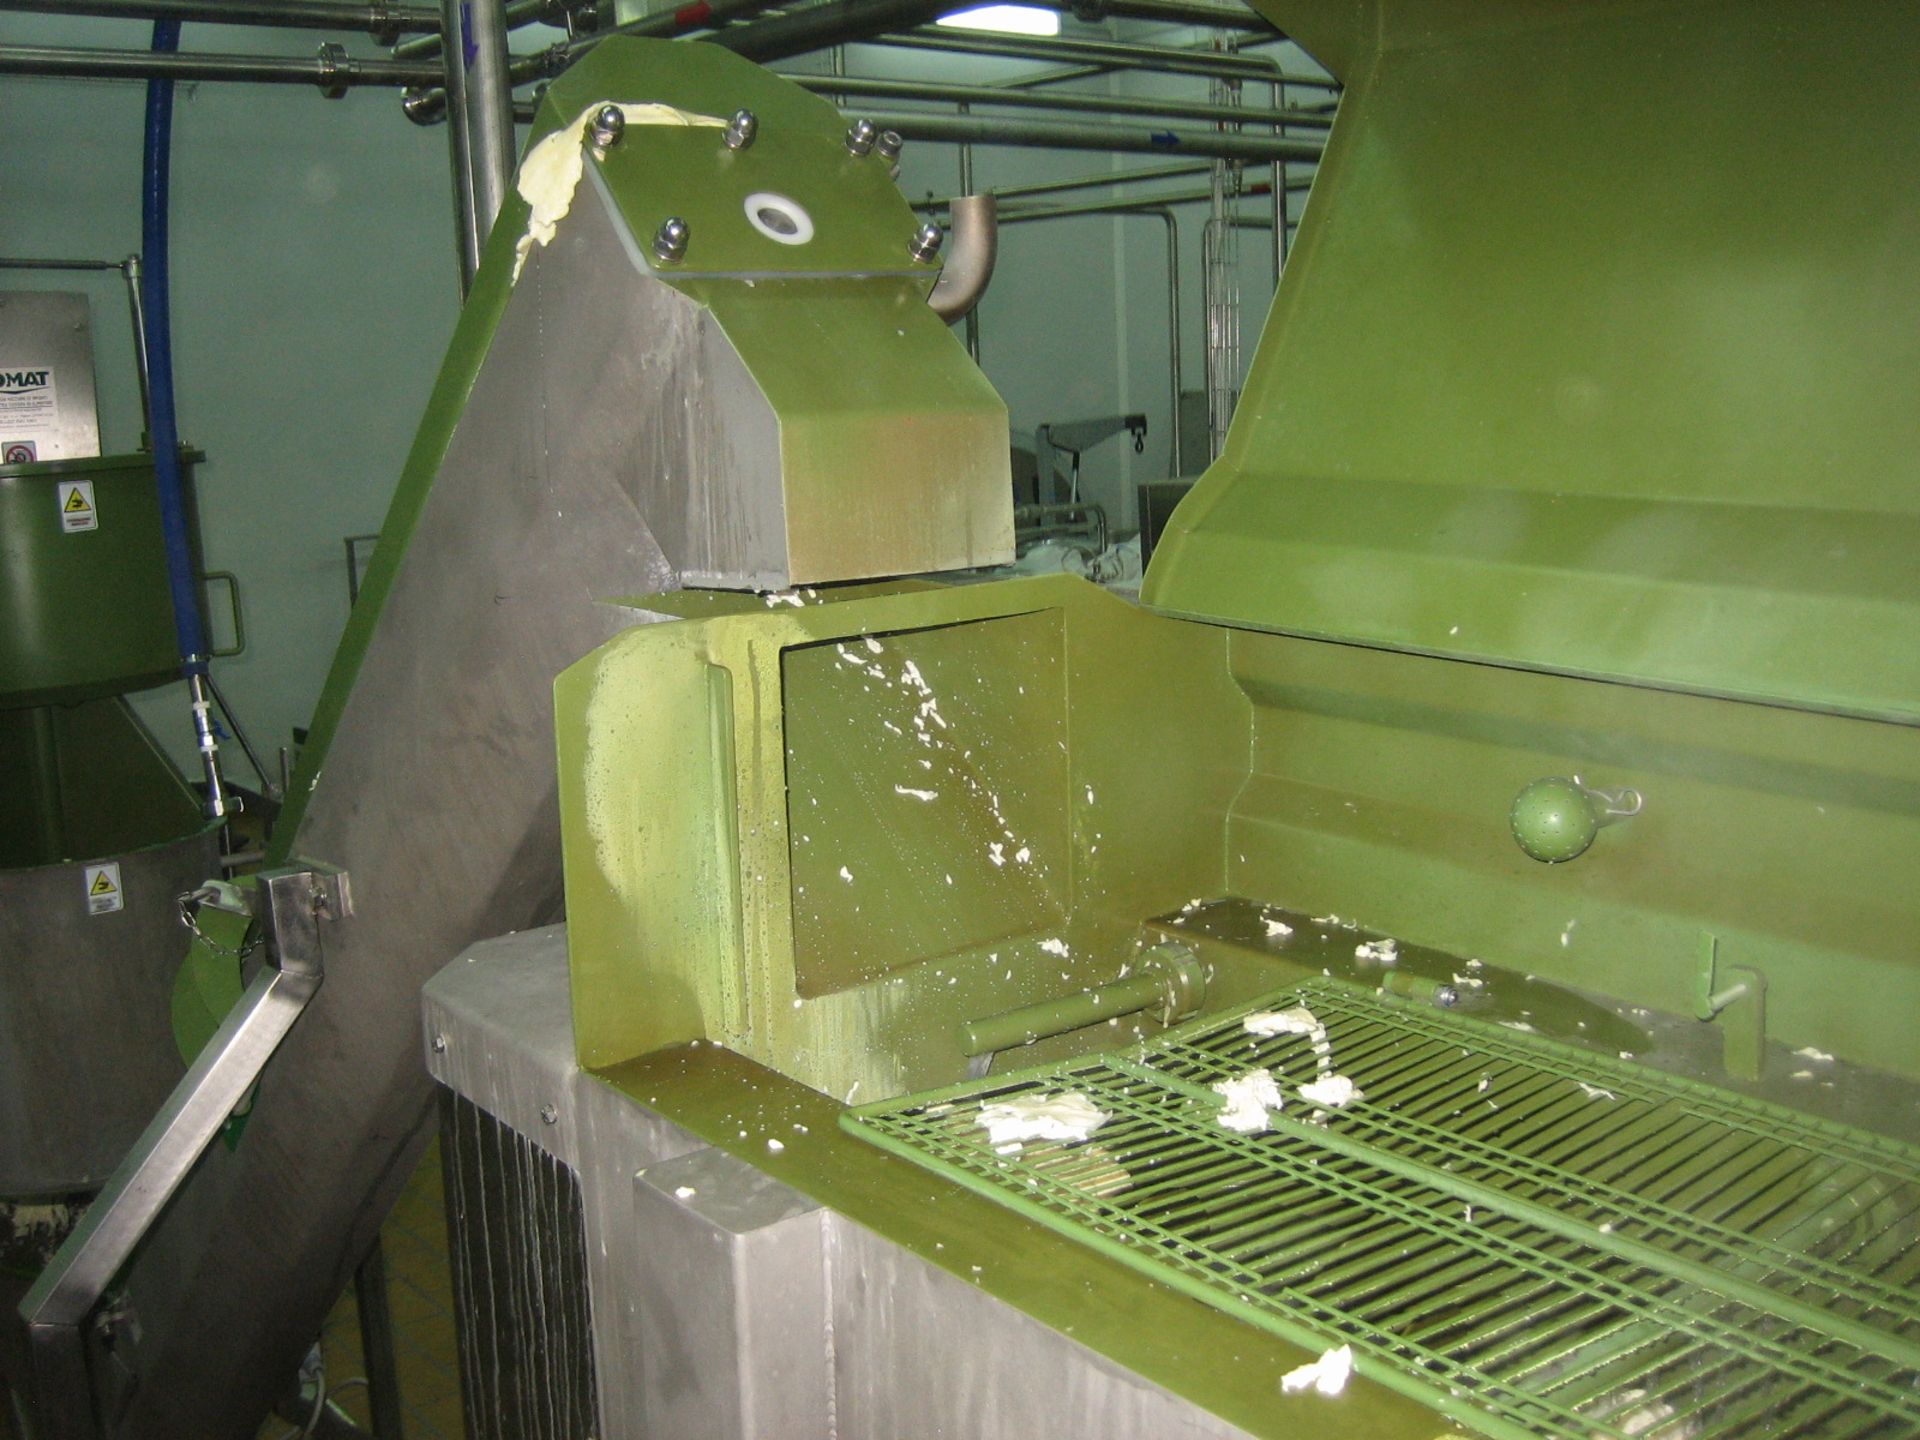 2X COMAT PROCESSING LINES FOR MOZZARELLA CHEESE TO PRODUCE MOZZARELLA STICKS AND MOZZARELLA BLOCKS - Image 6 of 10